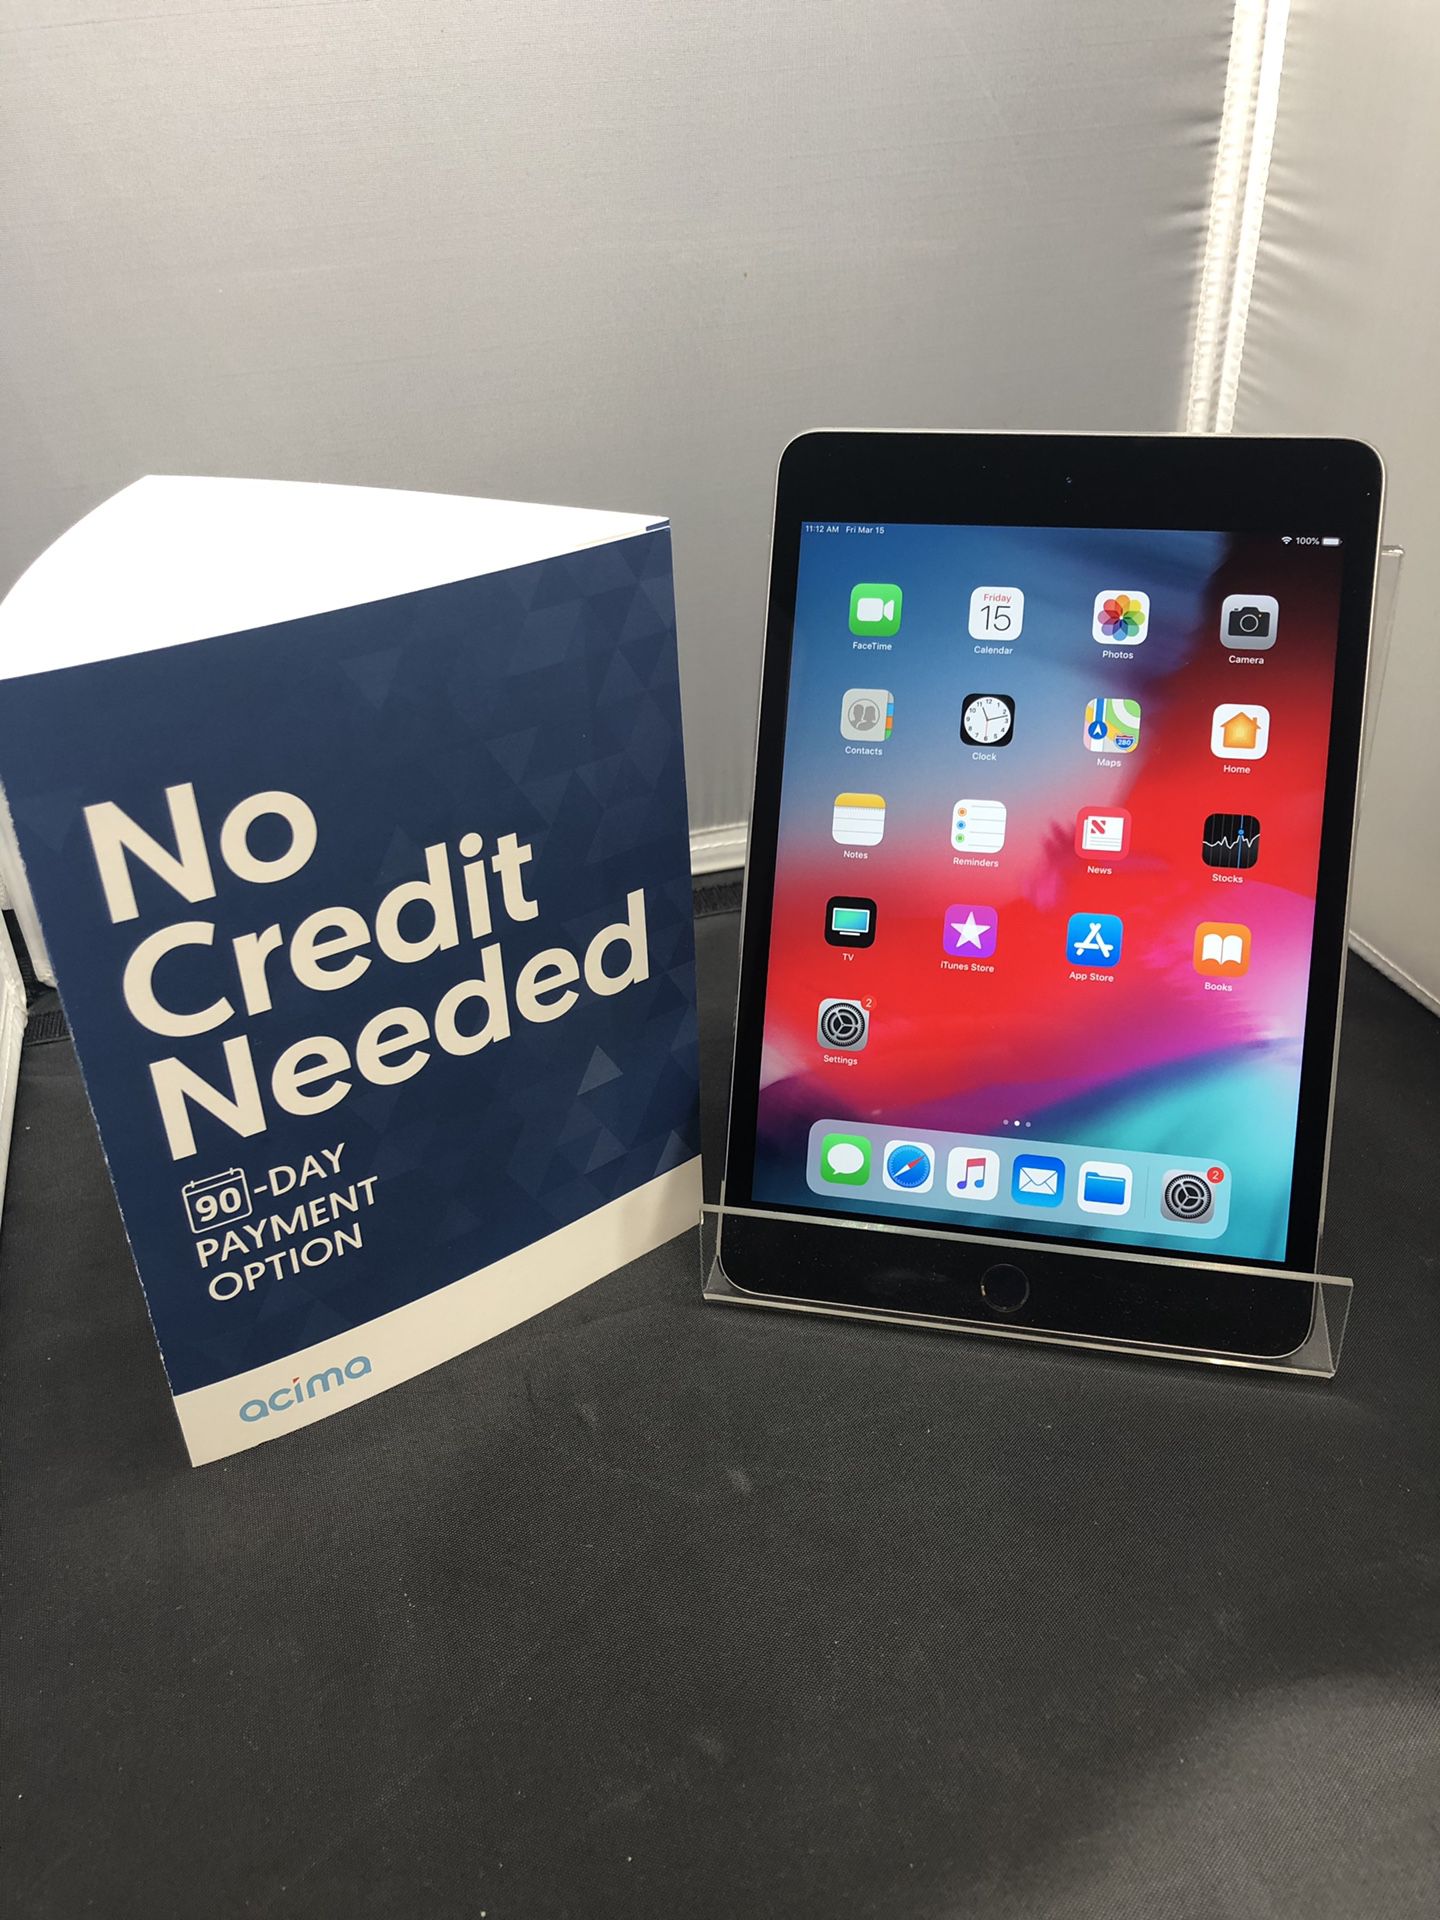 Apple iPad mini 4th generation 128gb + You can come to my store- — 875 N Mill St Lewisville Tx 75057 Bam liquidation —- * Monday- Friday 9am-5